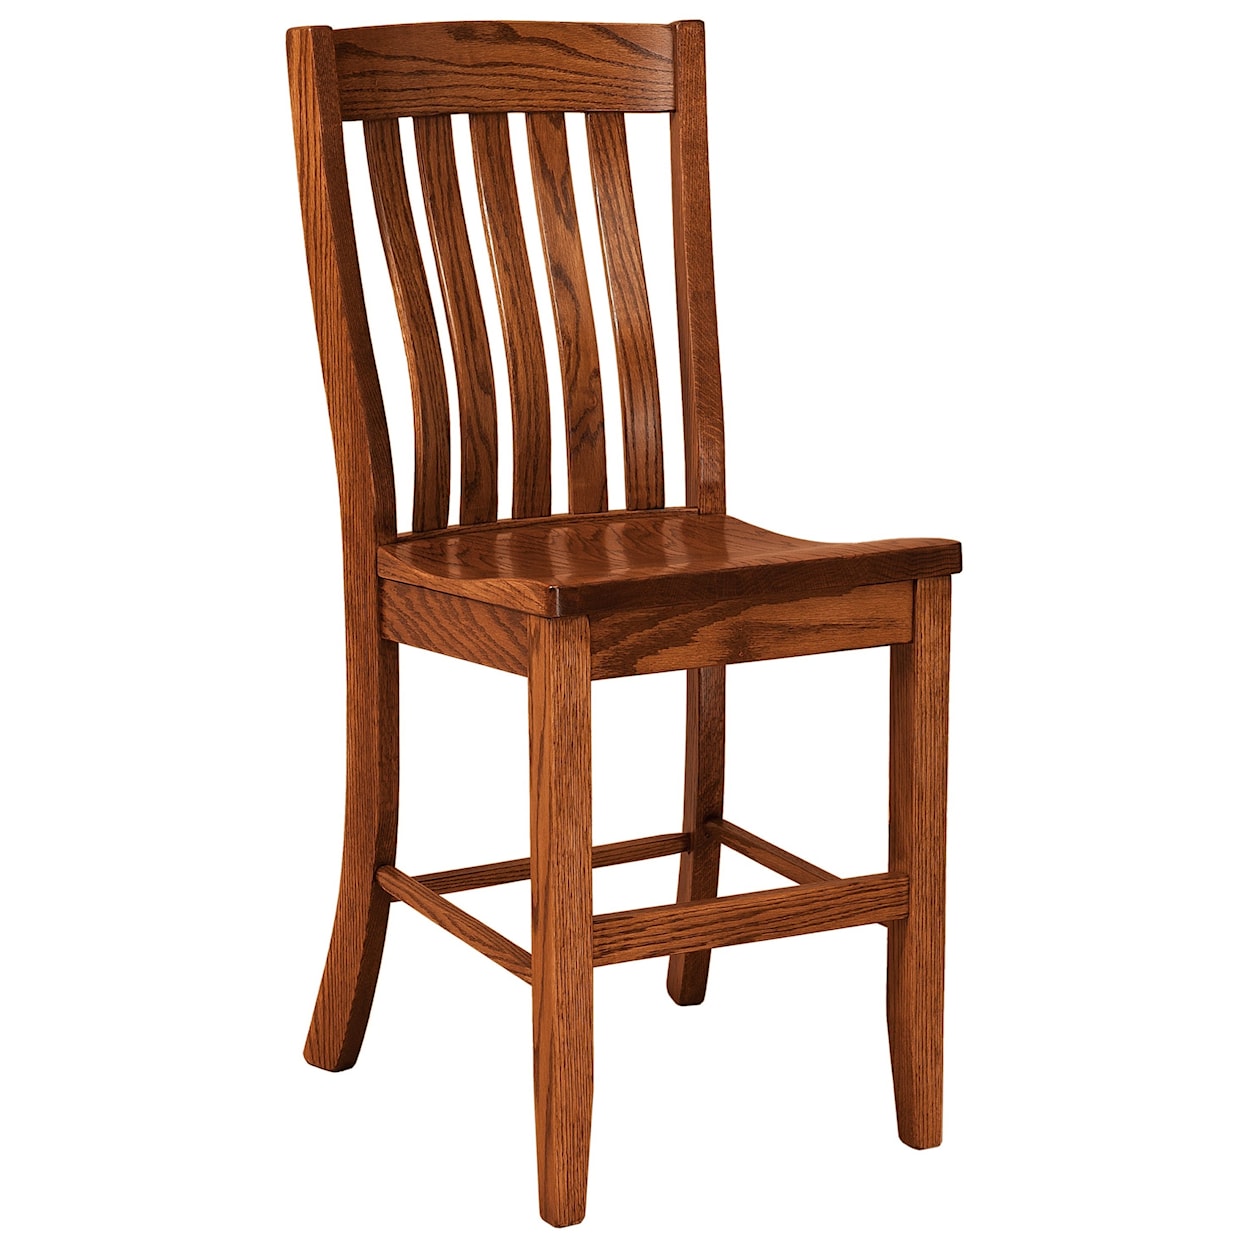 F&N Woodworking Houghton Stationary Bar Stool - Wood Seat